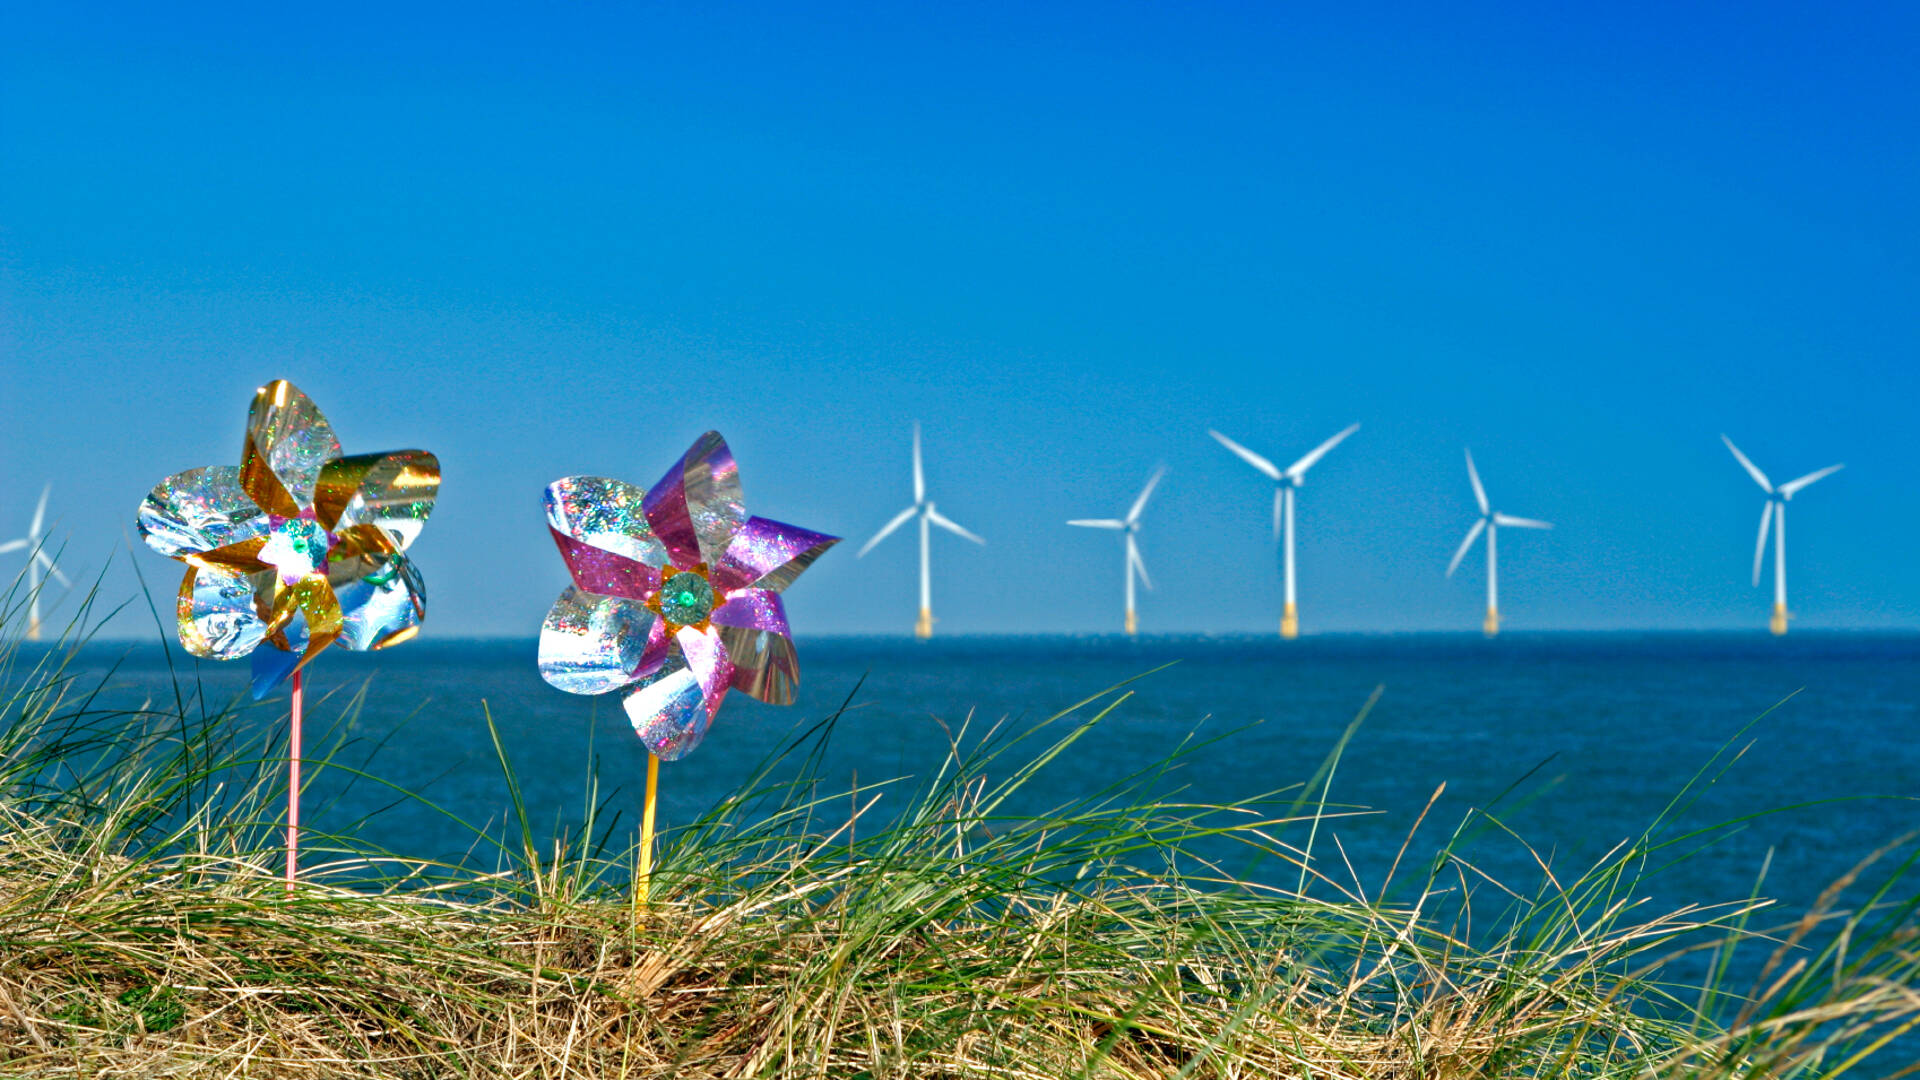 Zonal pricing could push 10GW of offshore wind into Southern England 